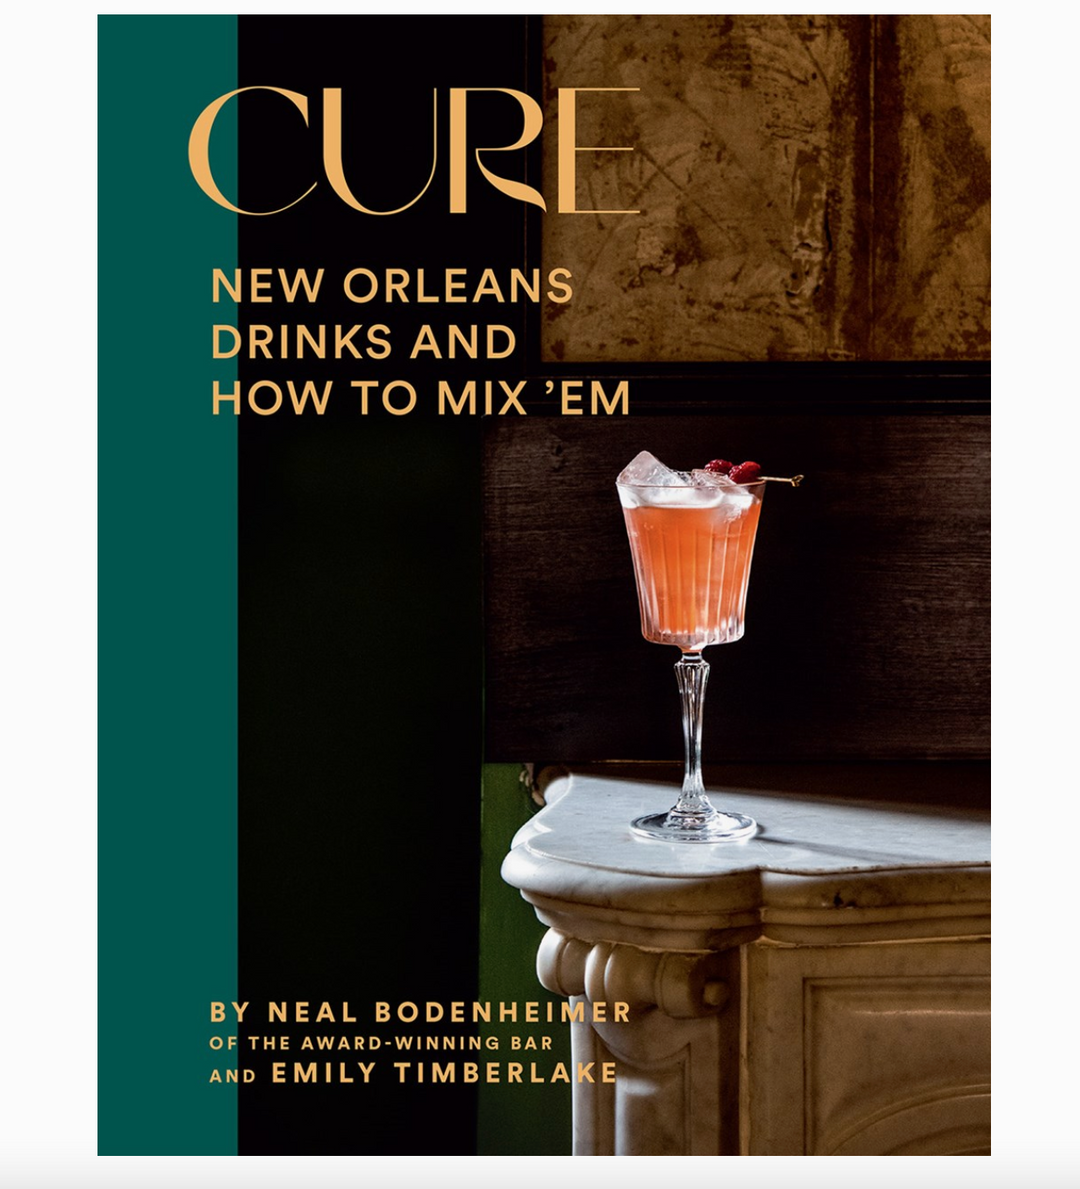 Cure- New Orleans Drinks and How to Mix 'em